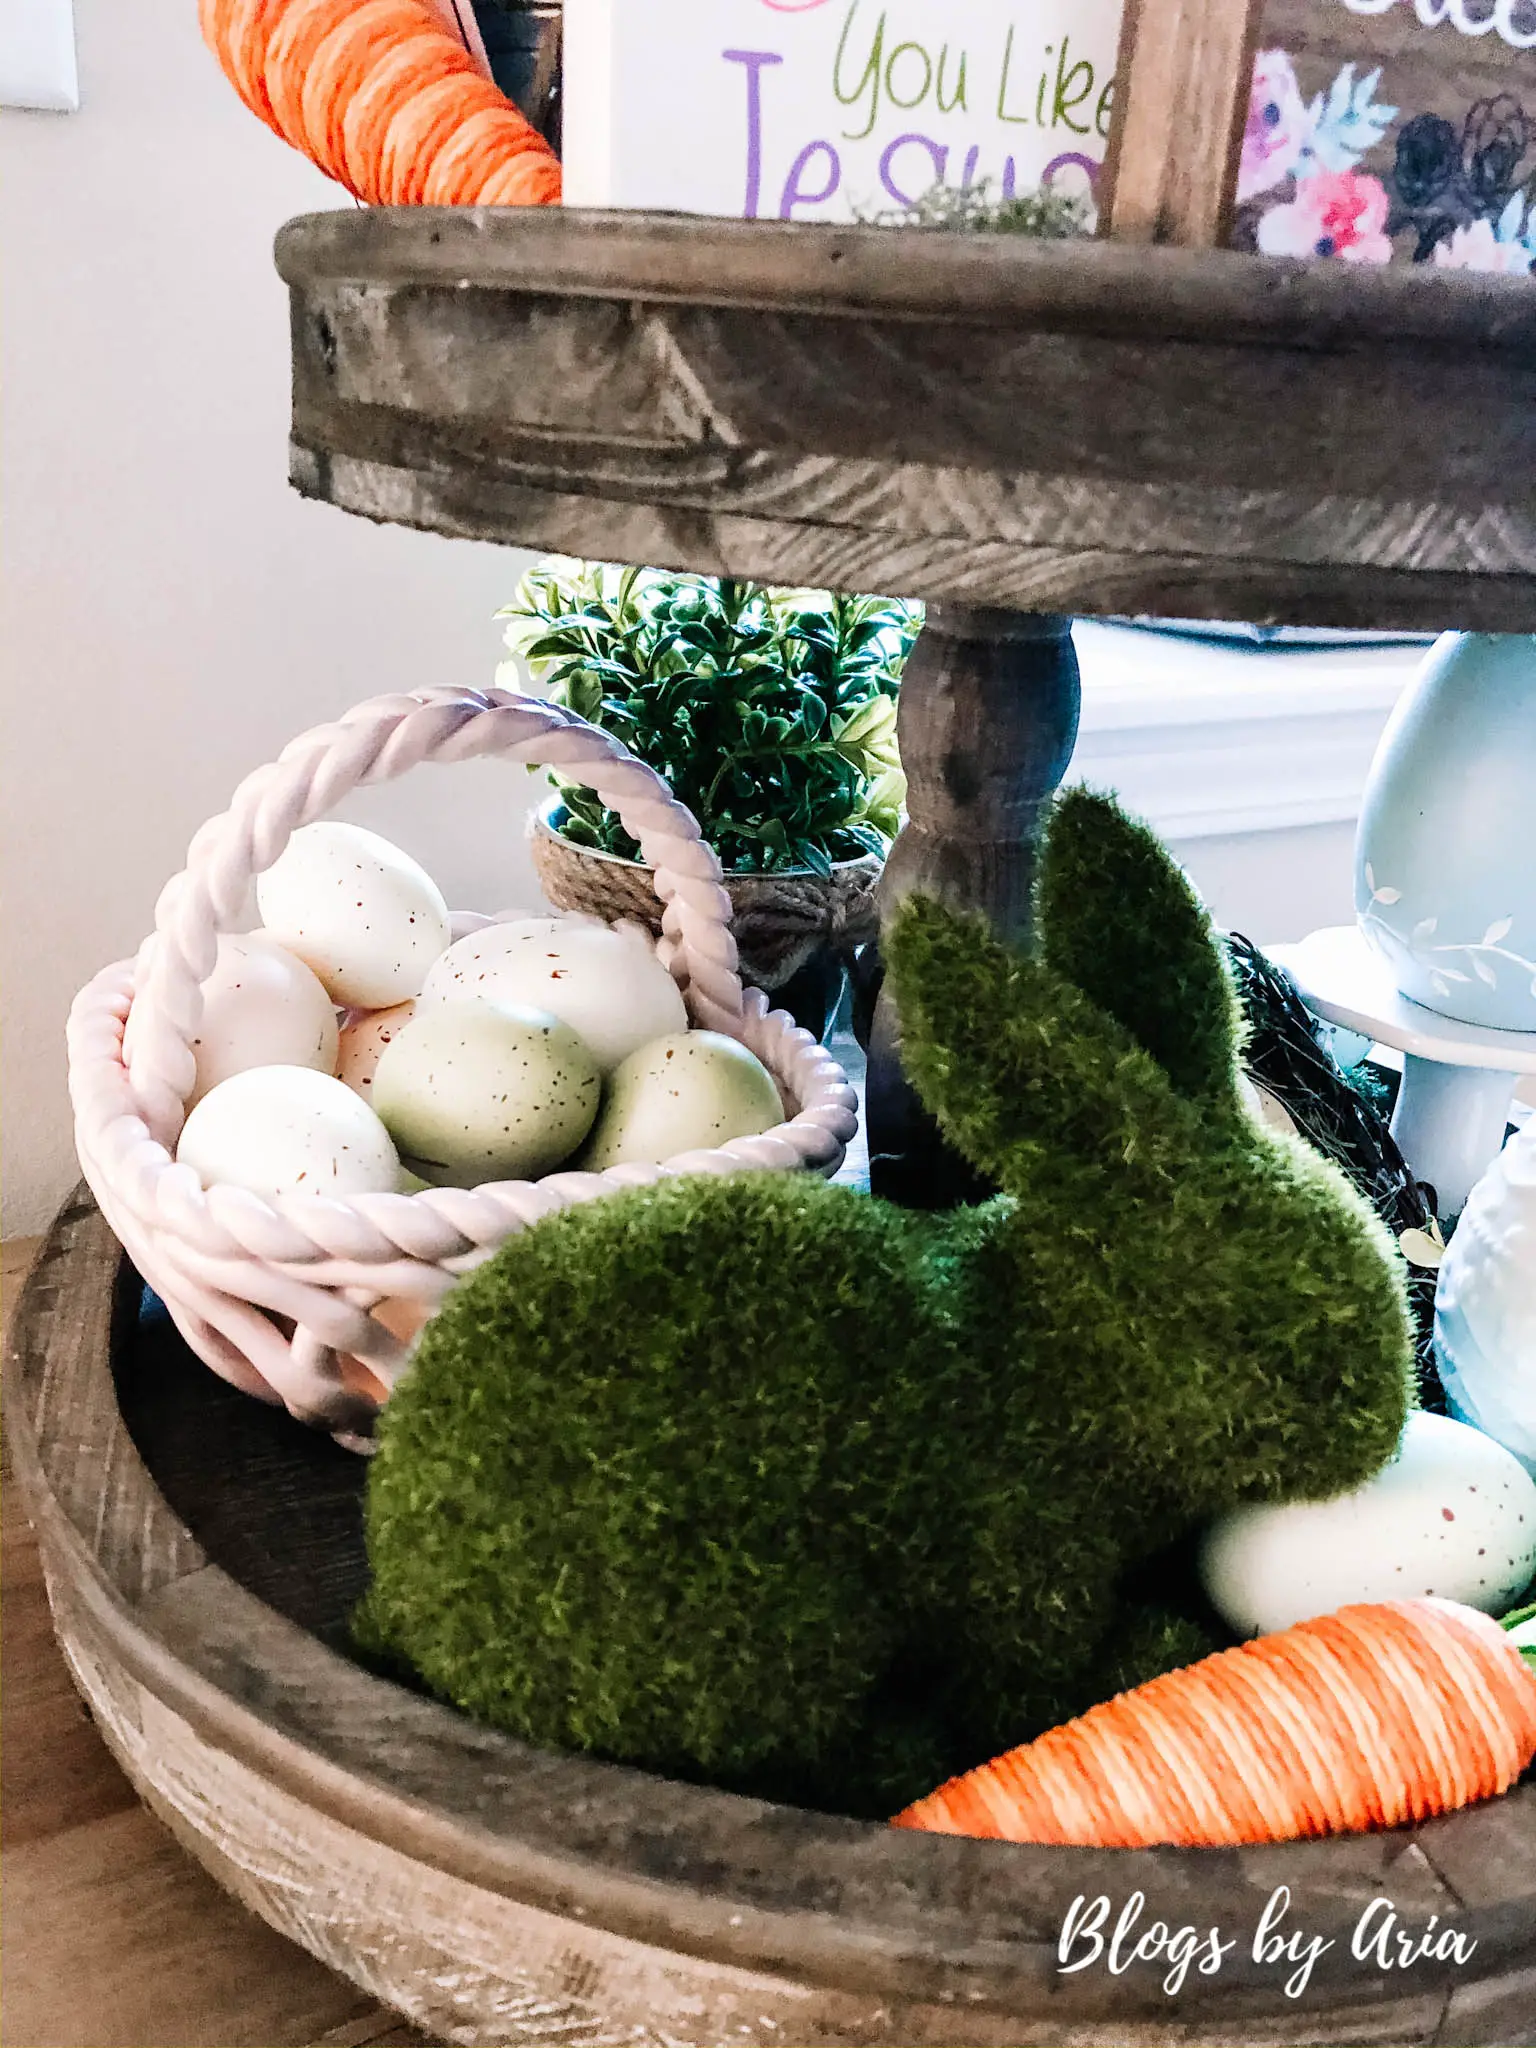 Easter tiered tray ideas